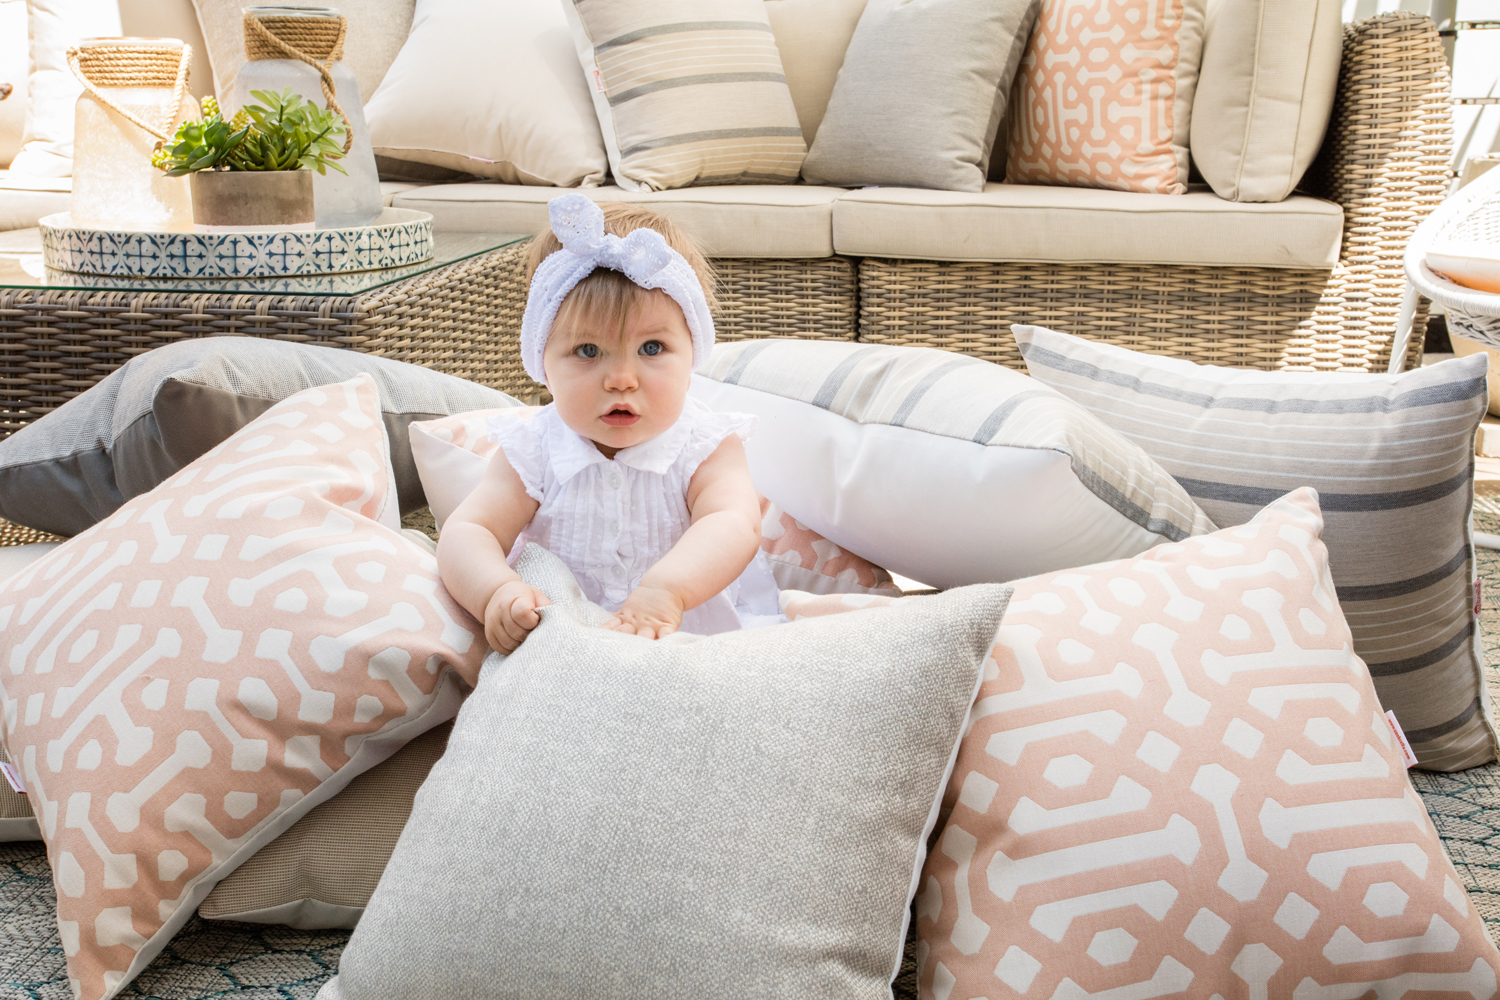 A baby playing among pillows